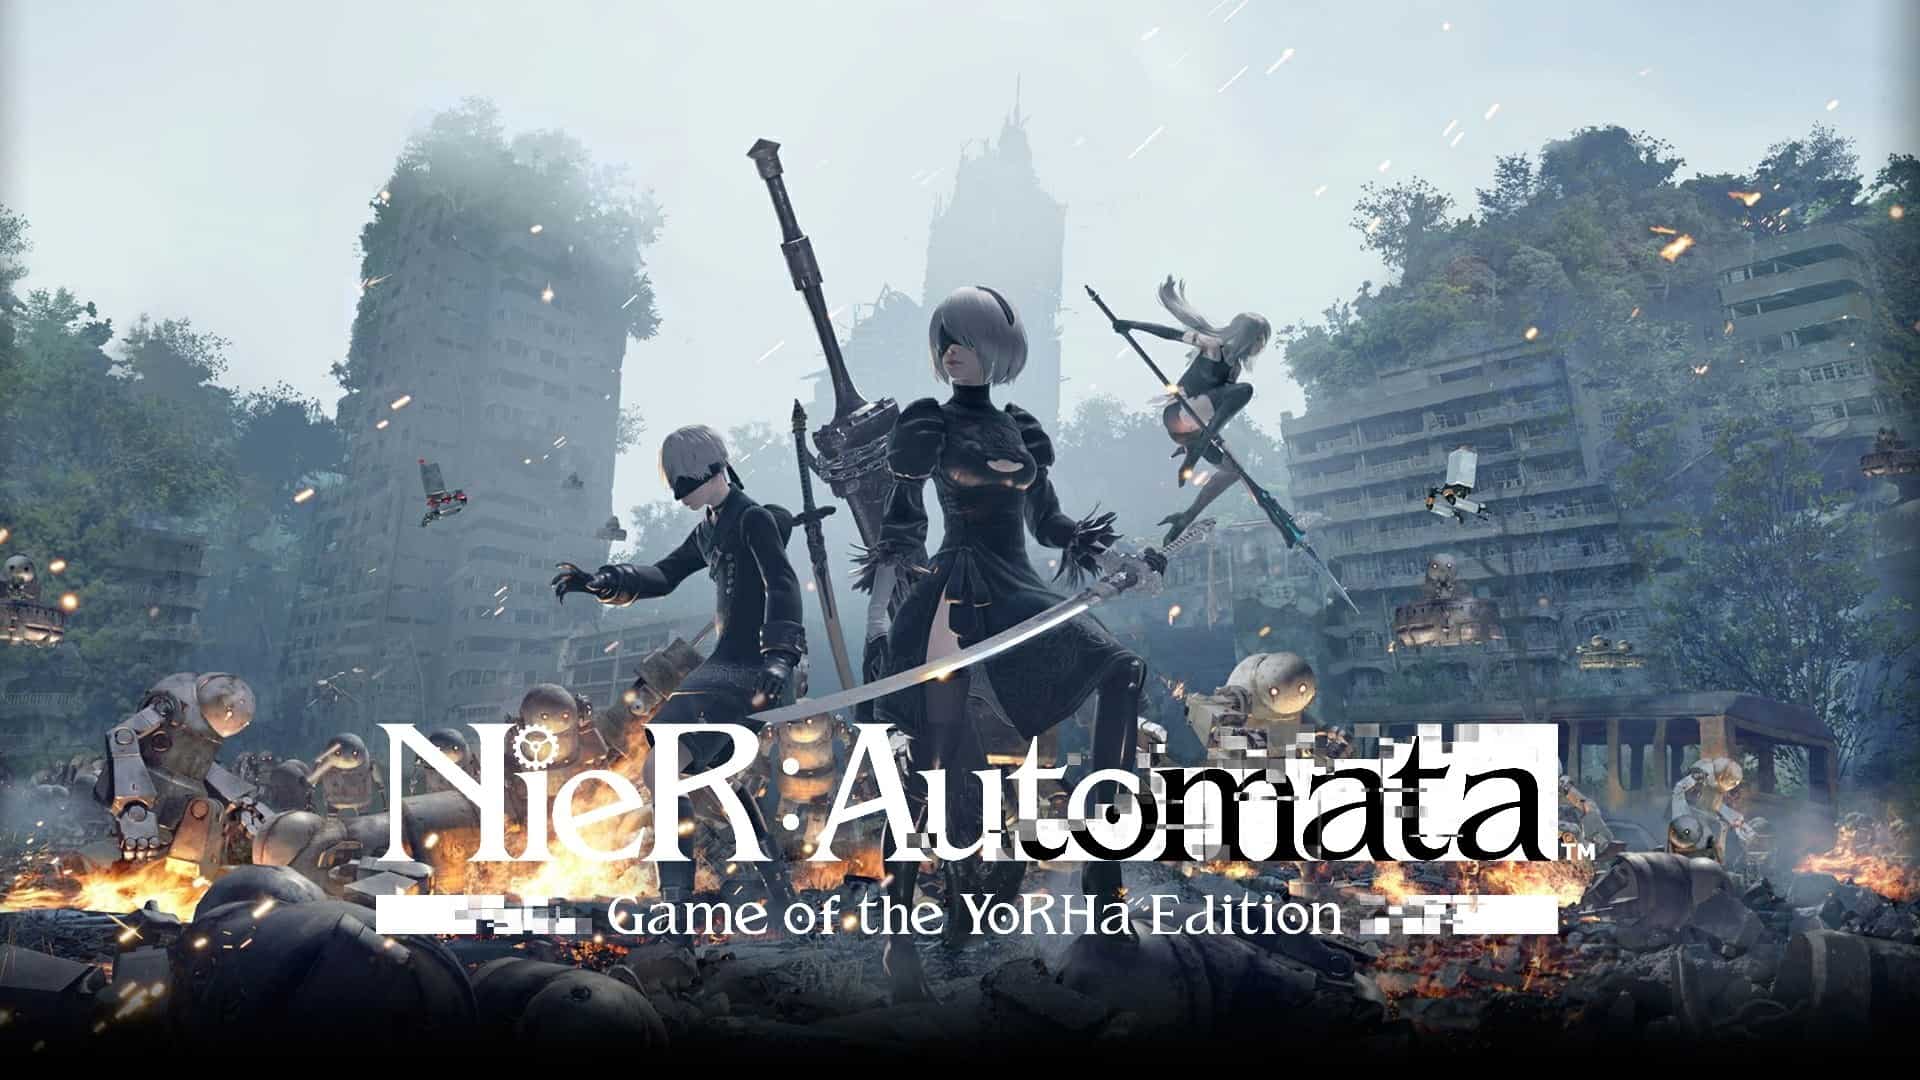 NieR:Automata Game of the YoRHa Edition (PC Digital Download Game) $16